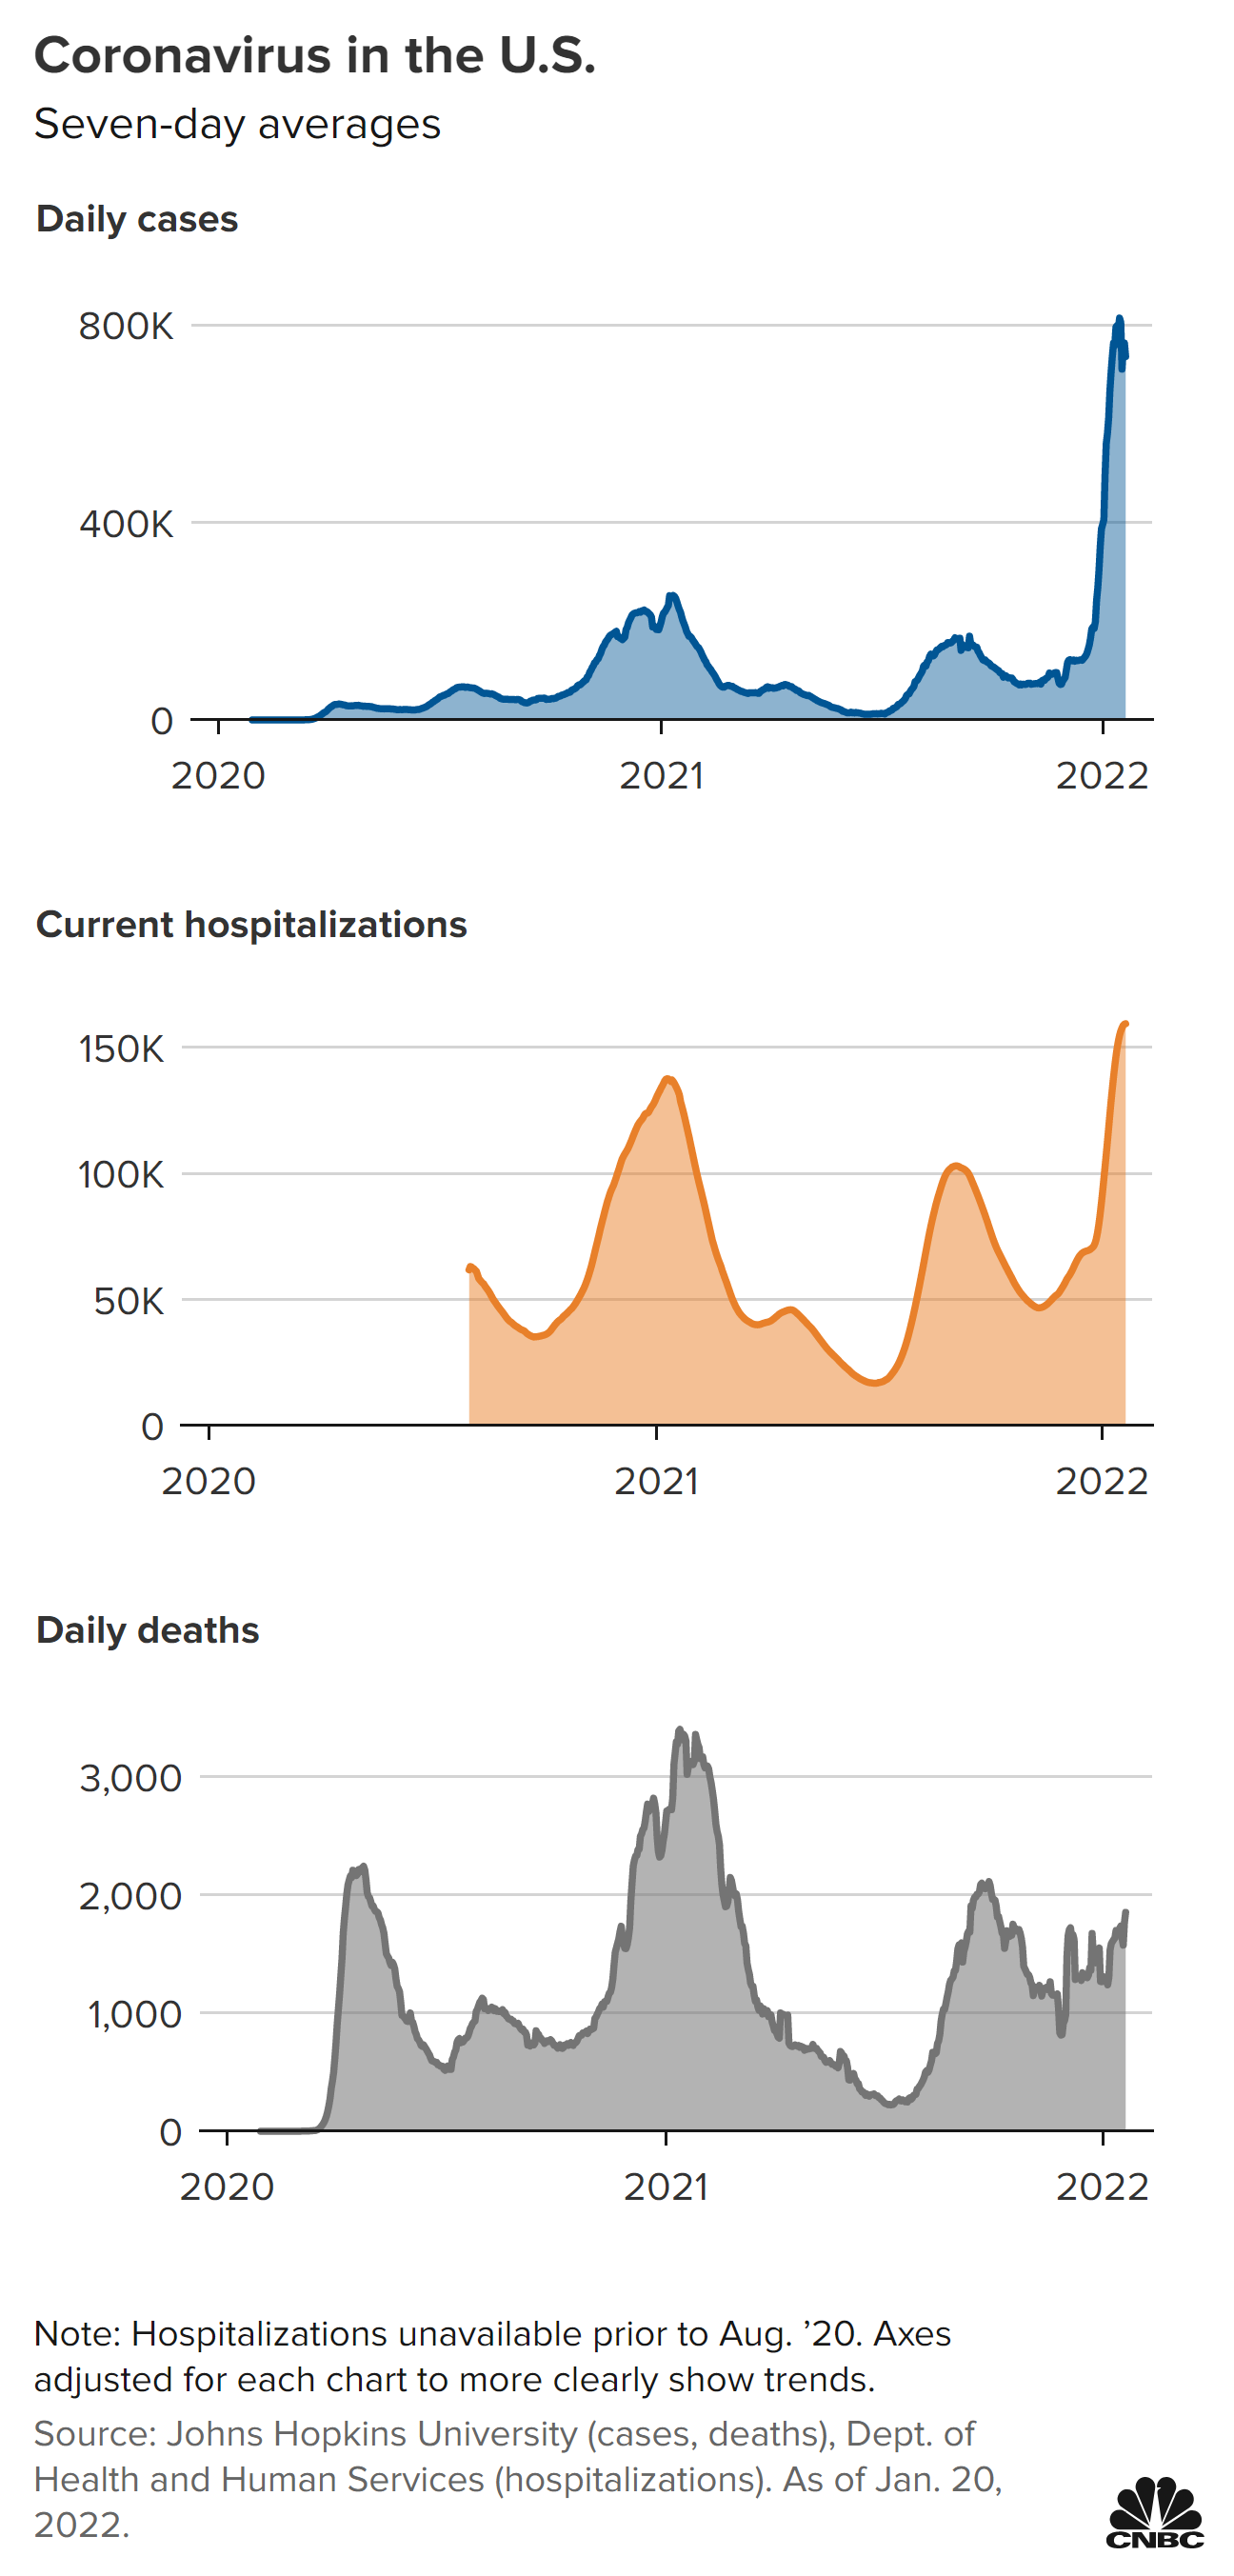 Coronavirus in the U.S., January 2020-January 2022, showing case rates, hospitalizations, and mortality. Data: Johns Hopkins University / Department of Health and Human Services. Graphic: CNBC